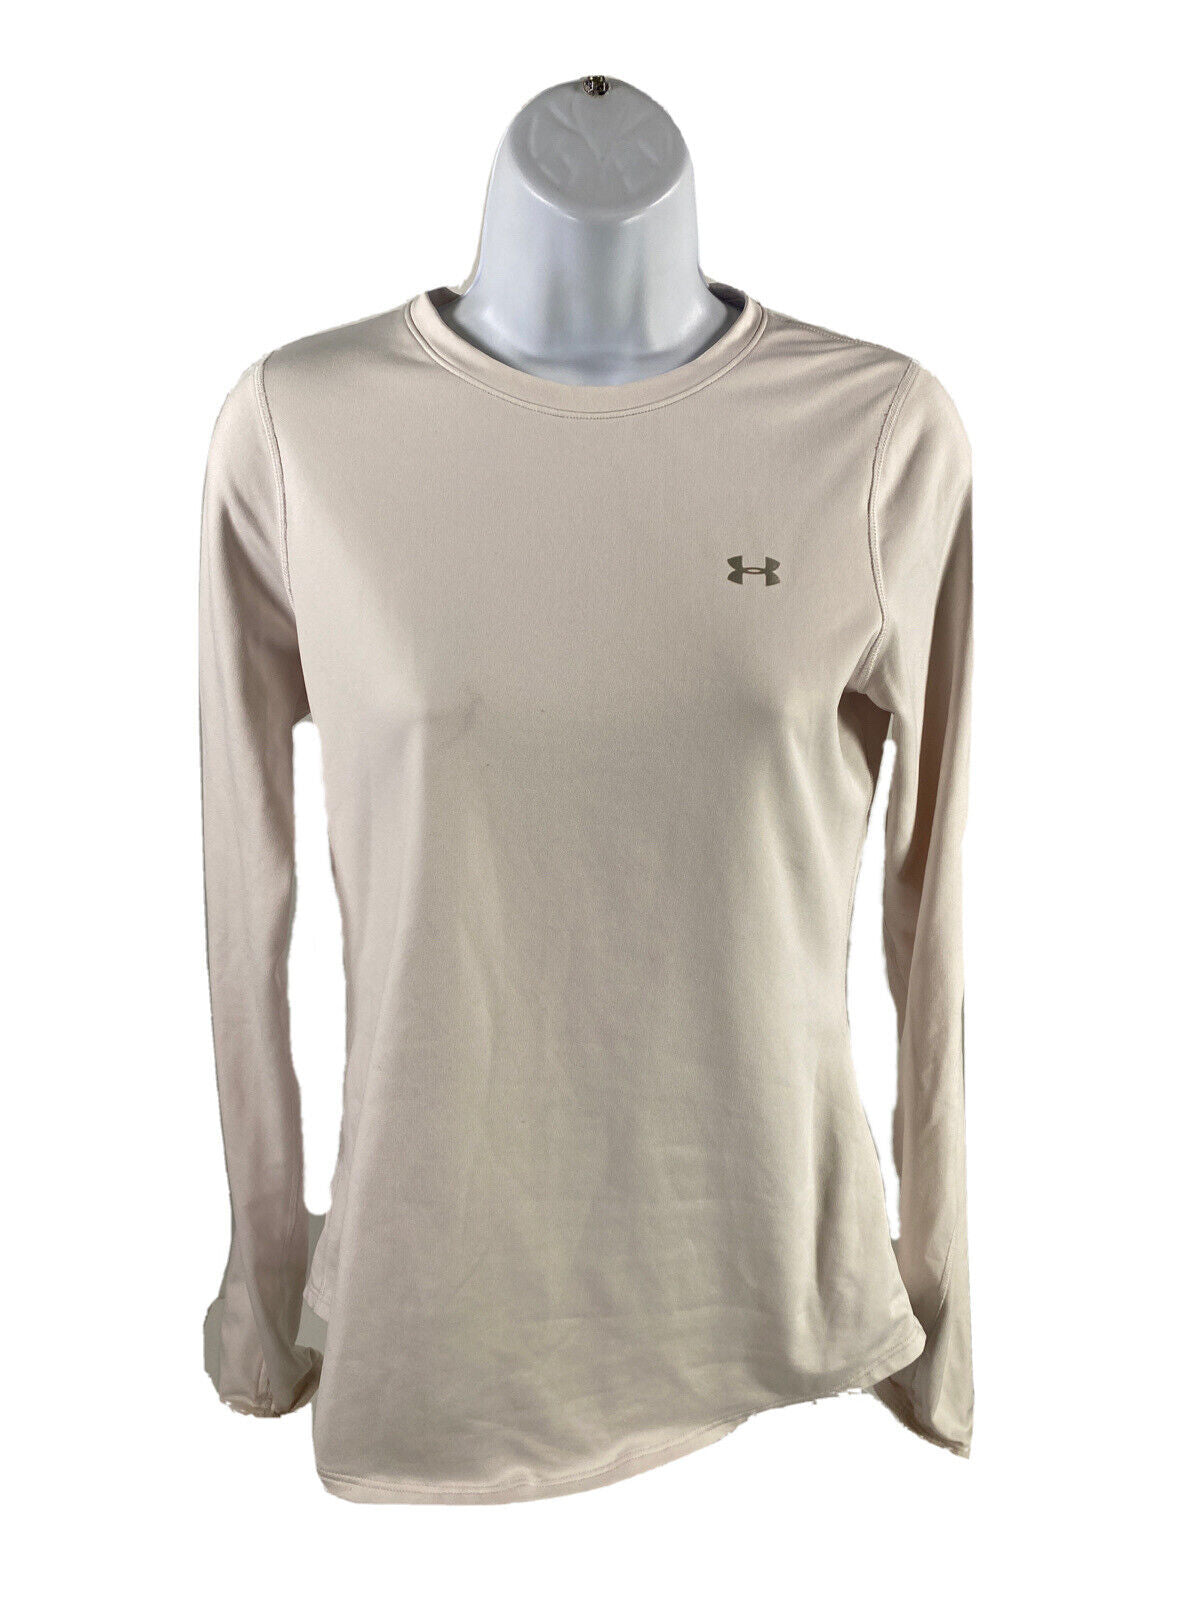 Under Armour Women's ColdGear® Fitted Long Sleeve Crew